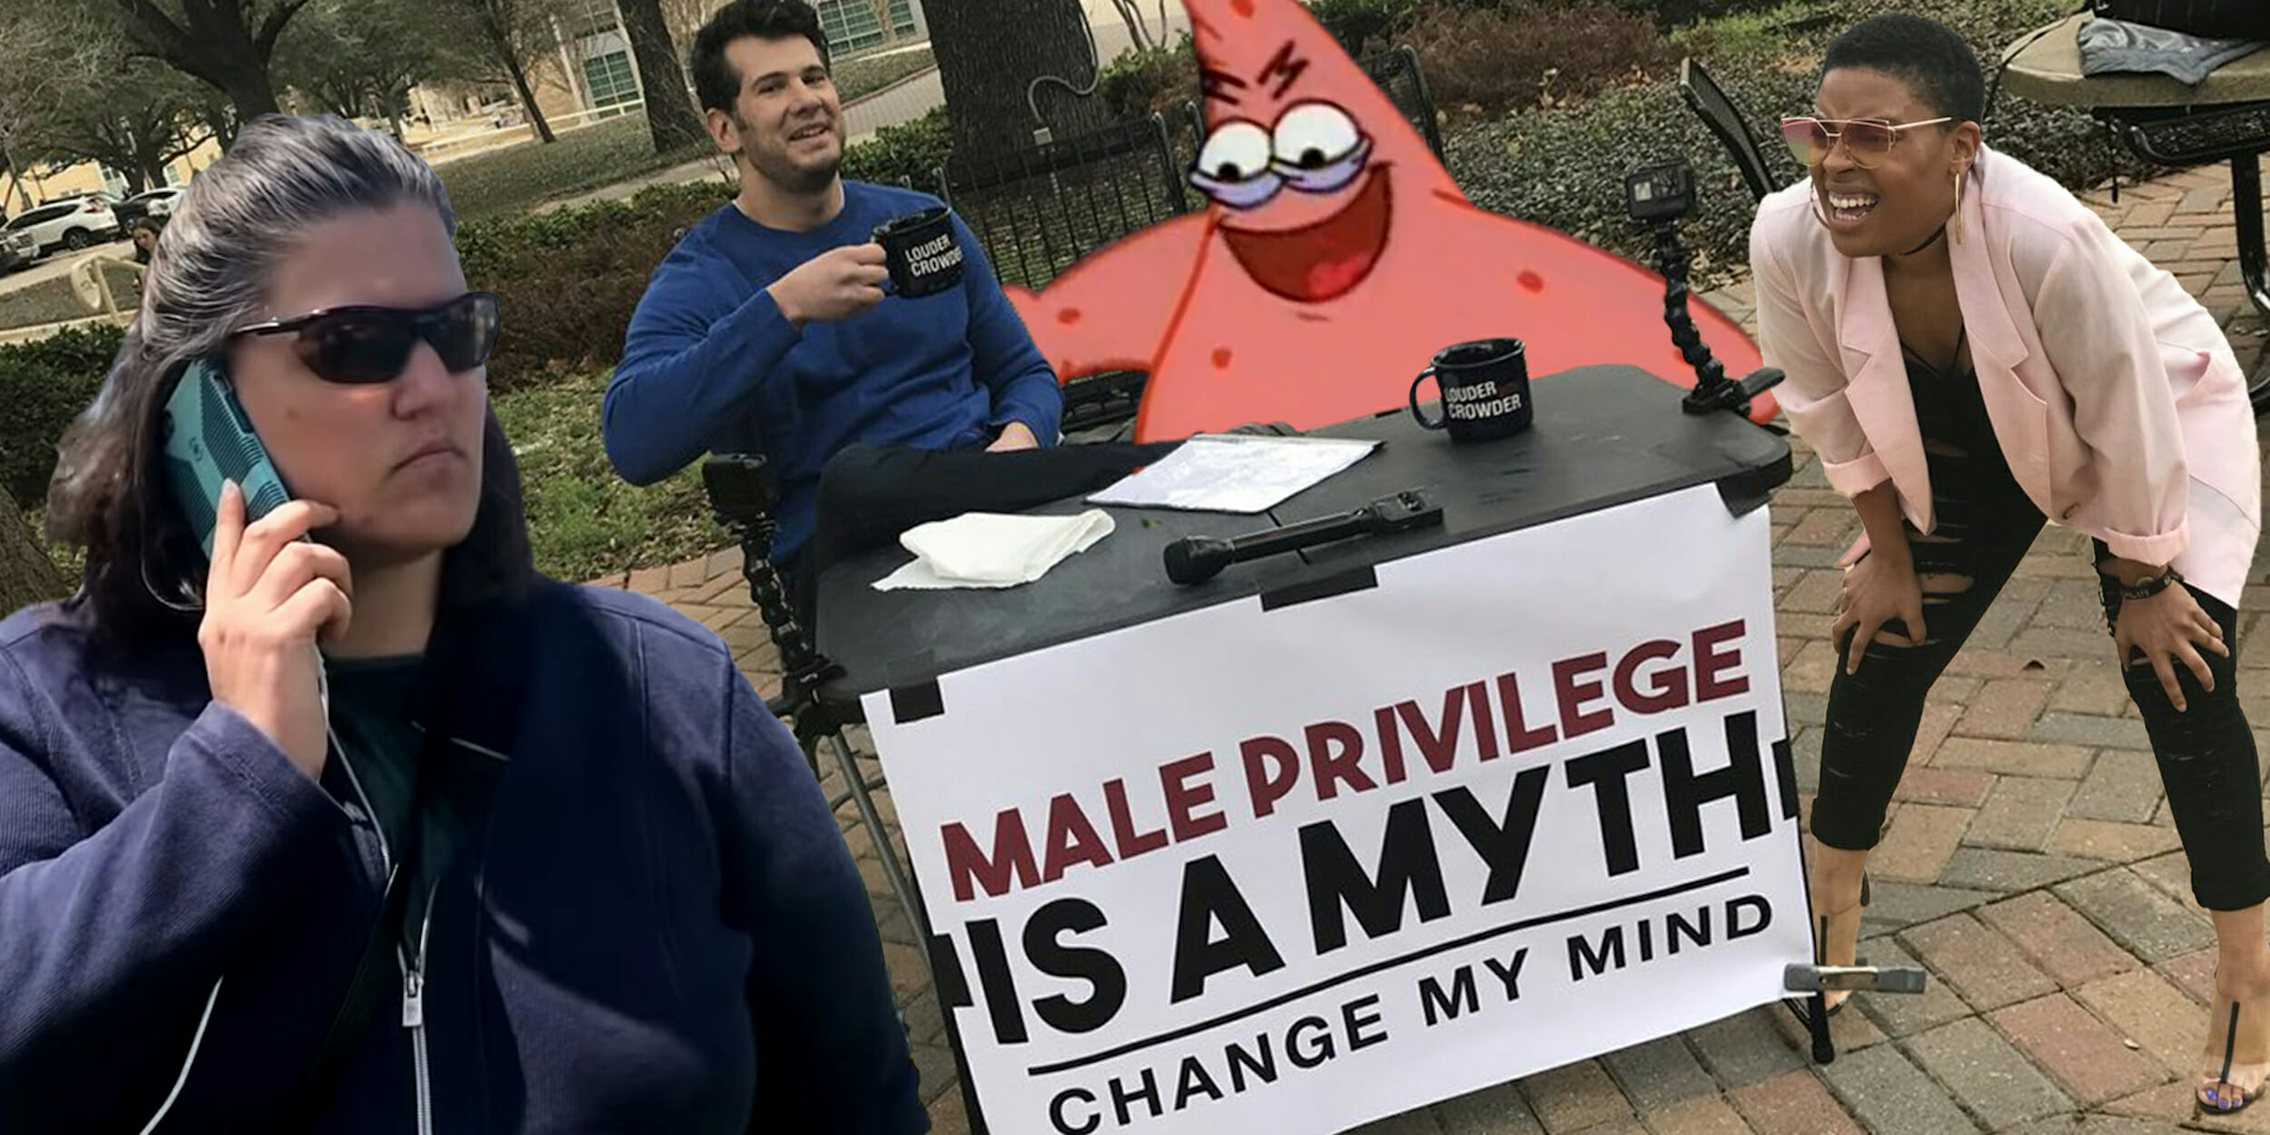 BBQ Becky, Evil Patrick, Change My Mind, and Squinting Woman memes